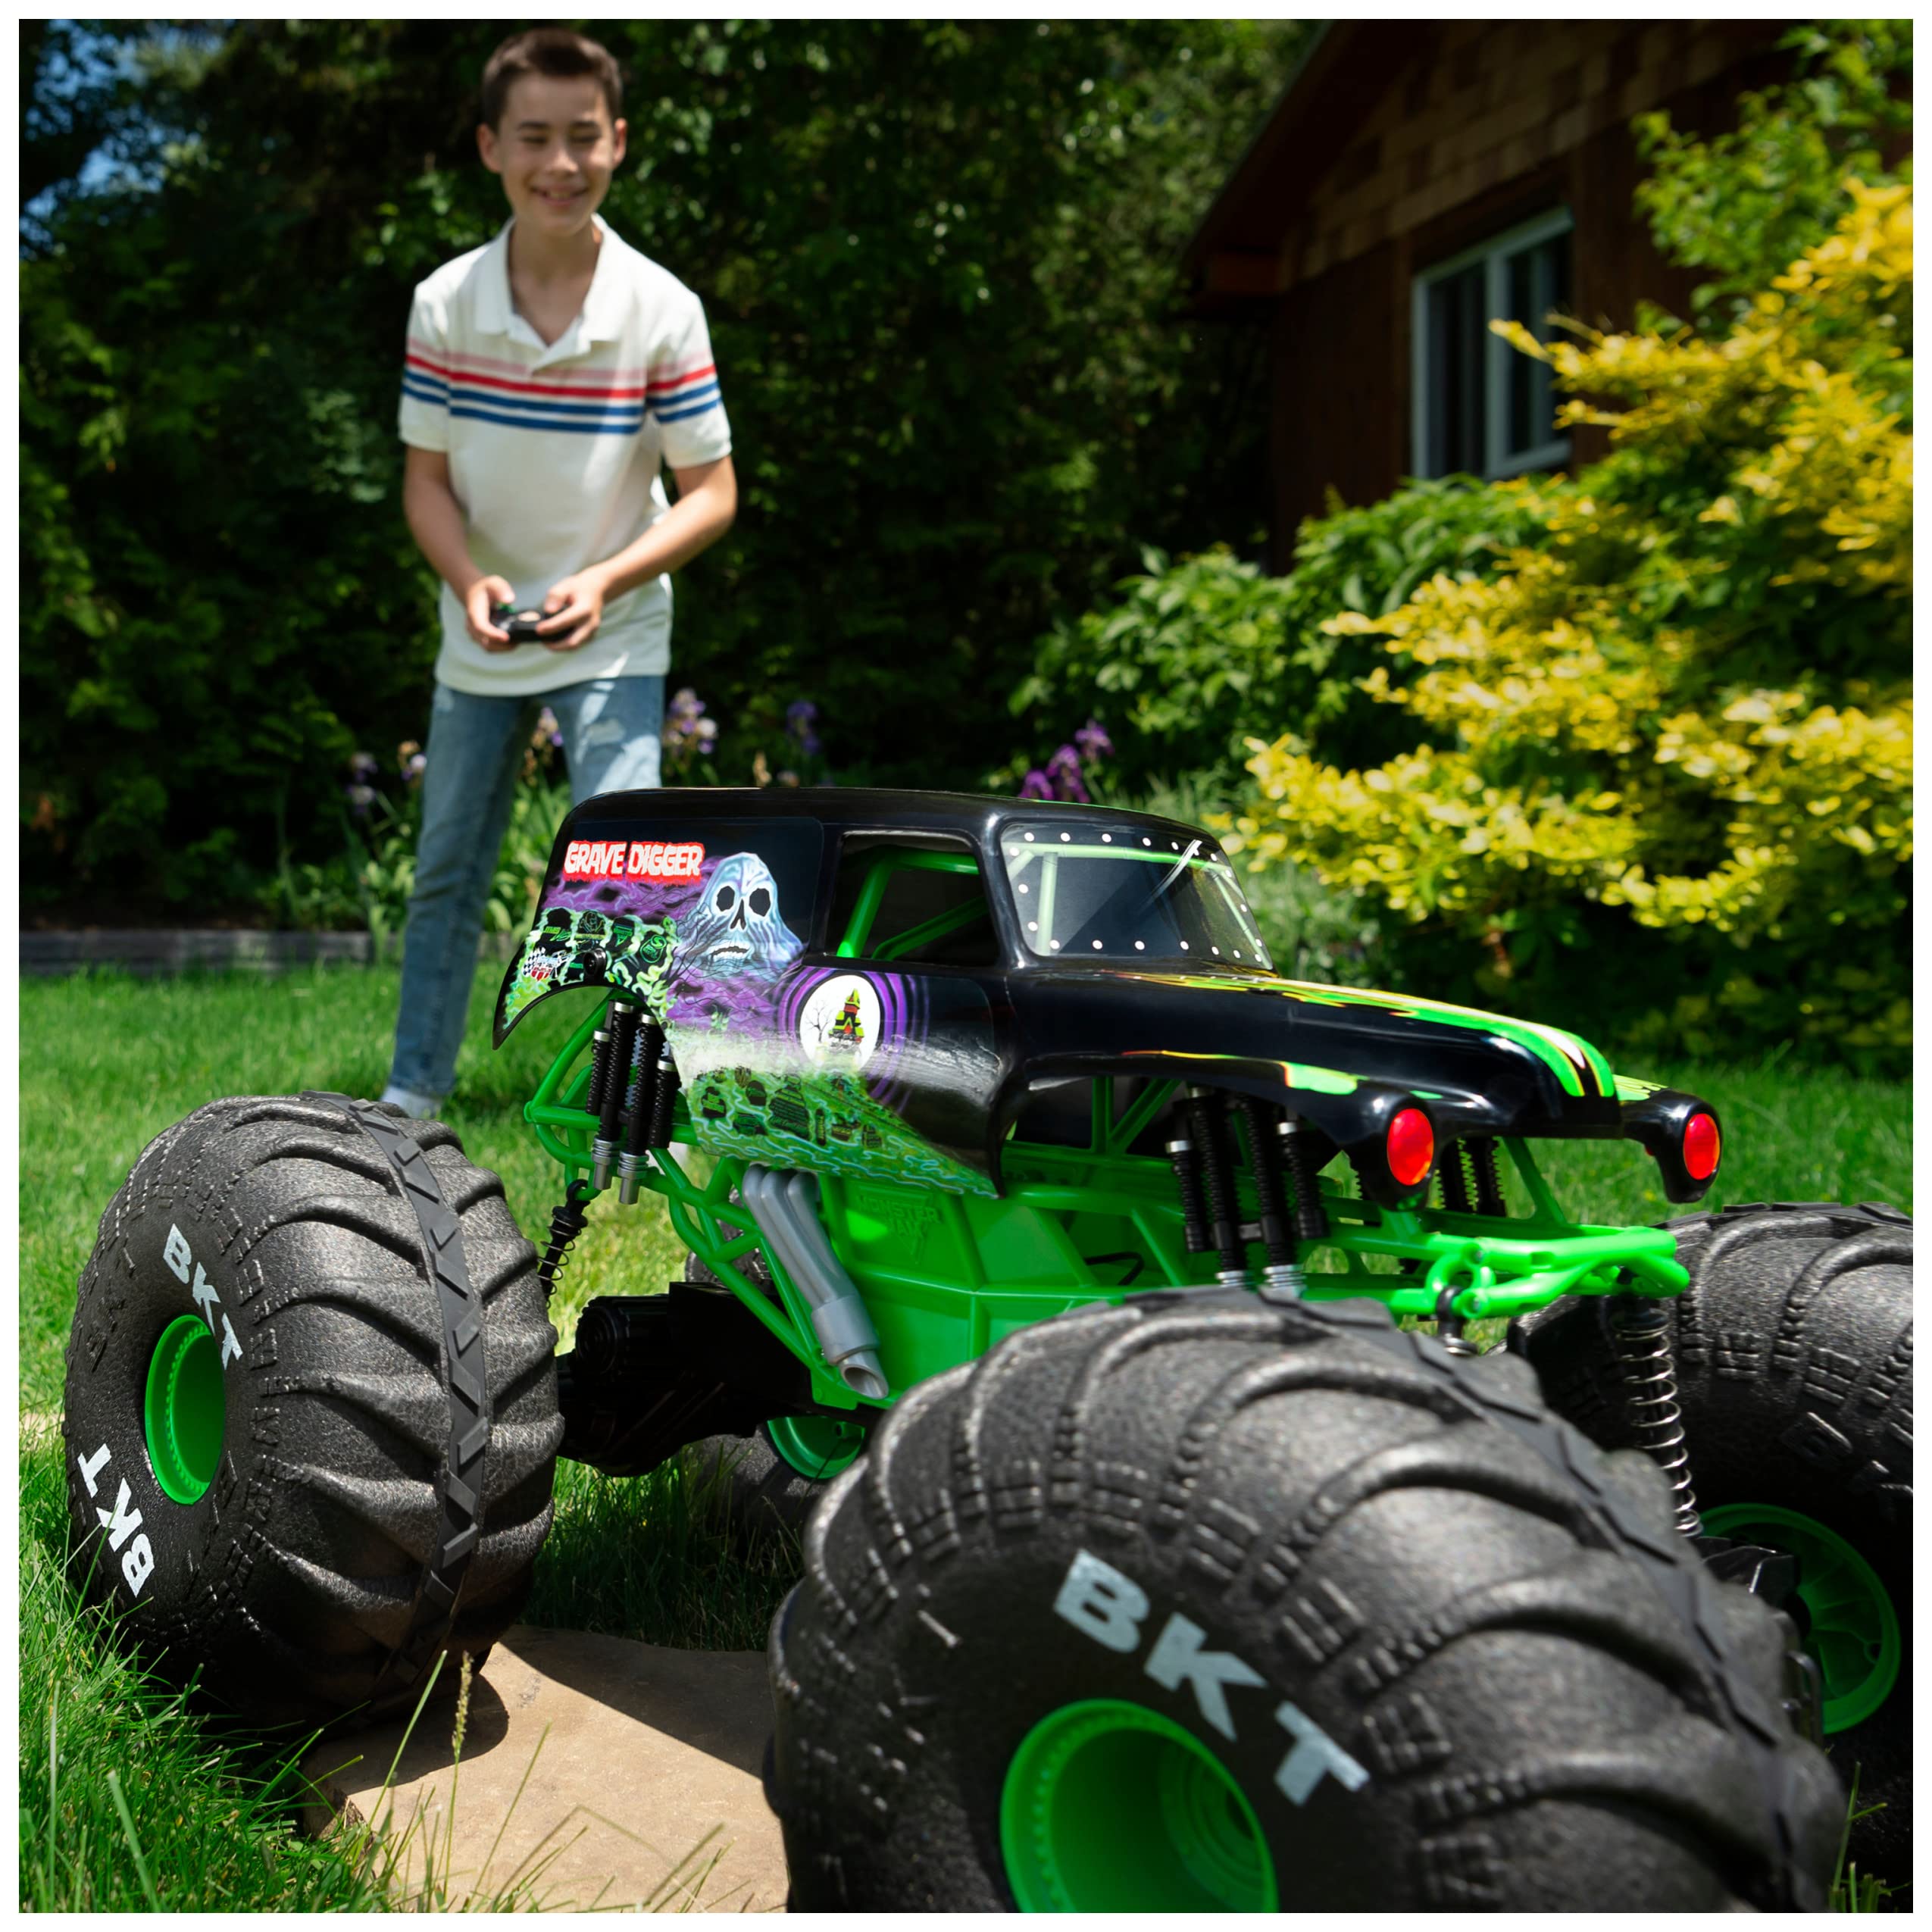 Monster Jam, Official Mega Grave Digger All-Terrain Remote Control Monster Truck with Lights, 1: 6 Scale, Kids Toys for Boys